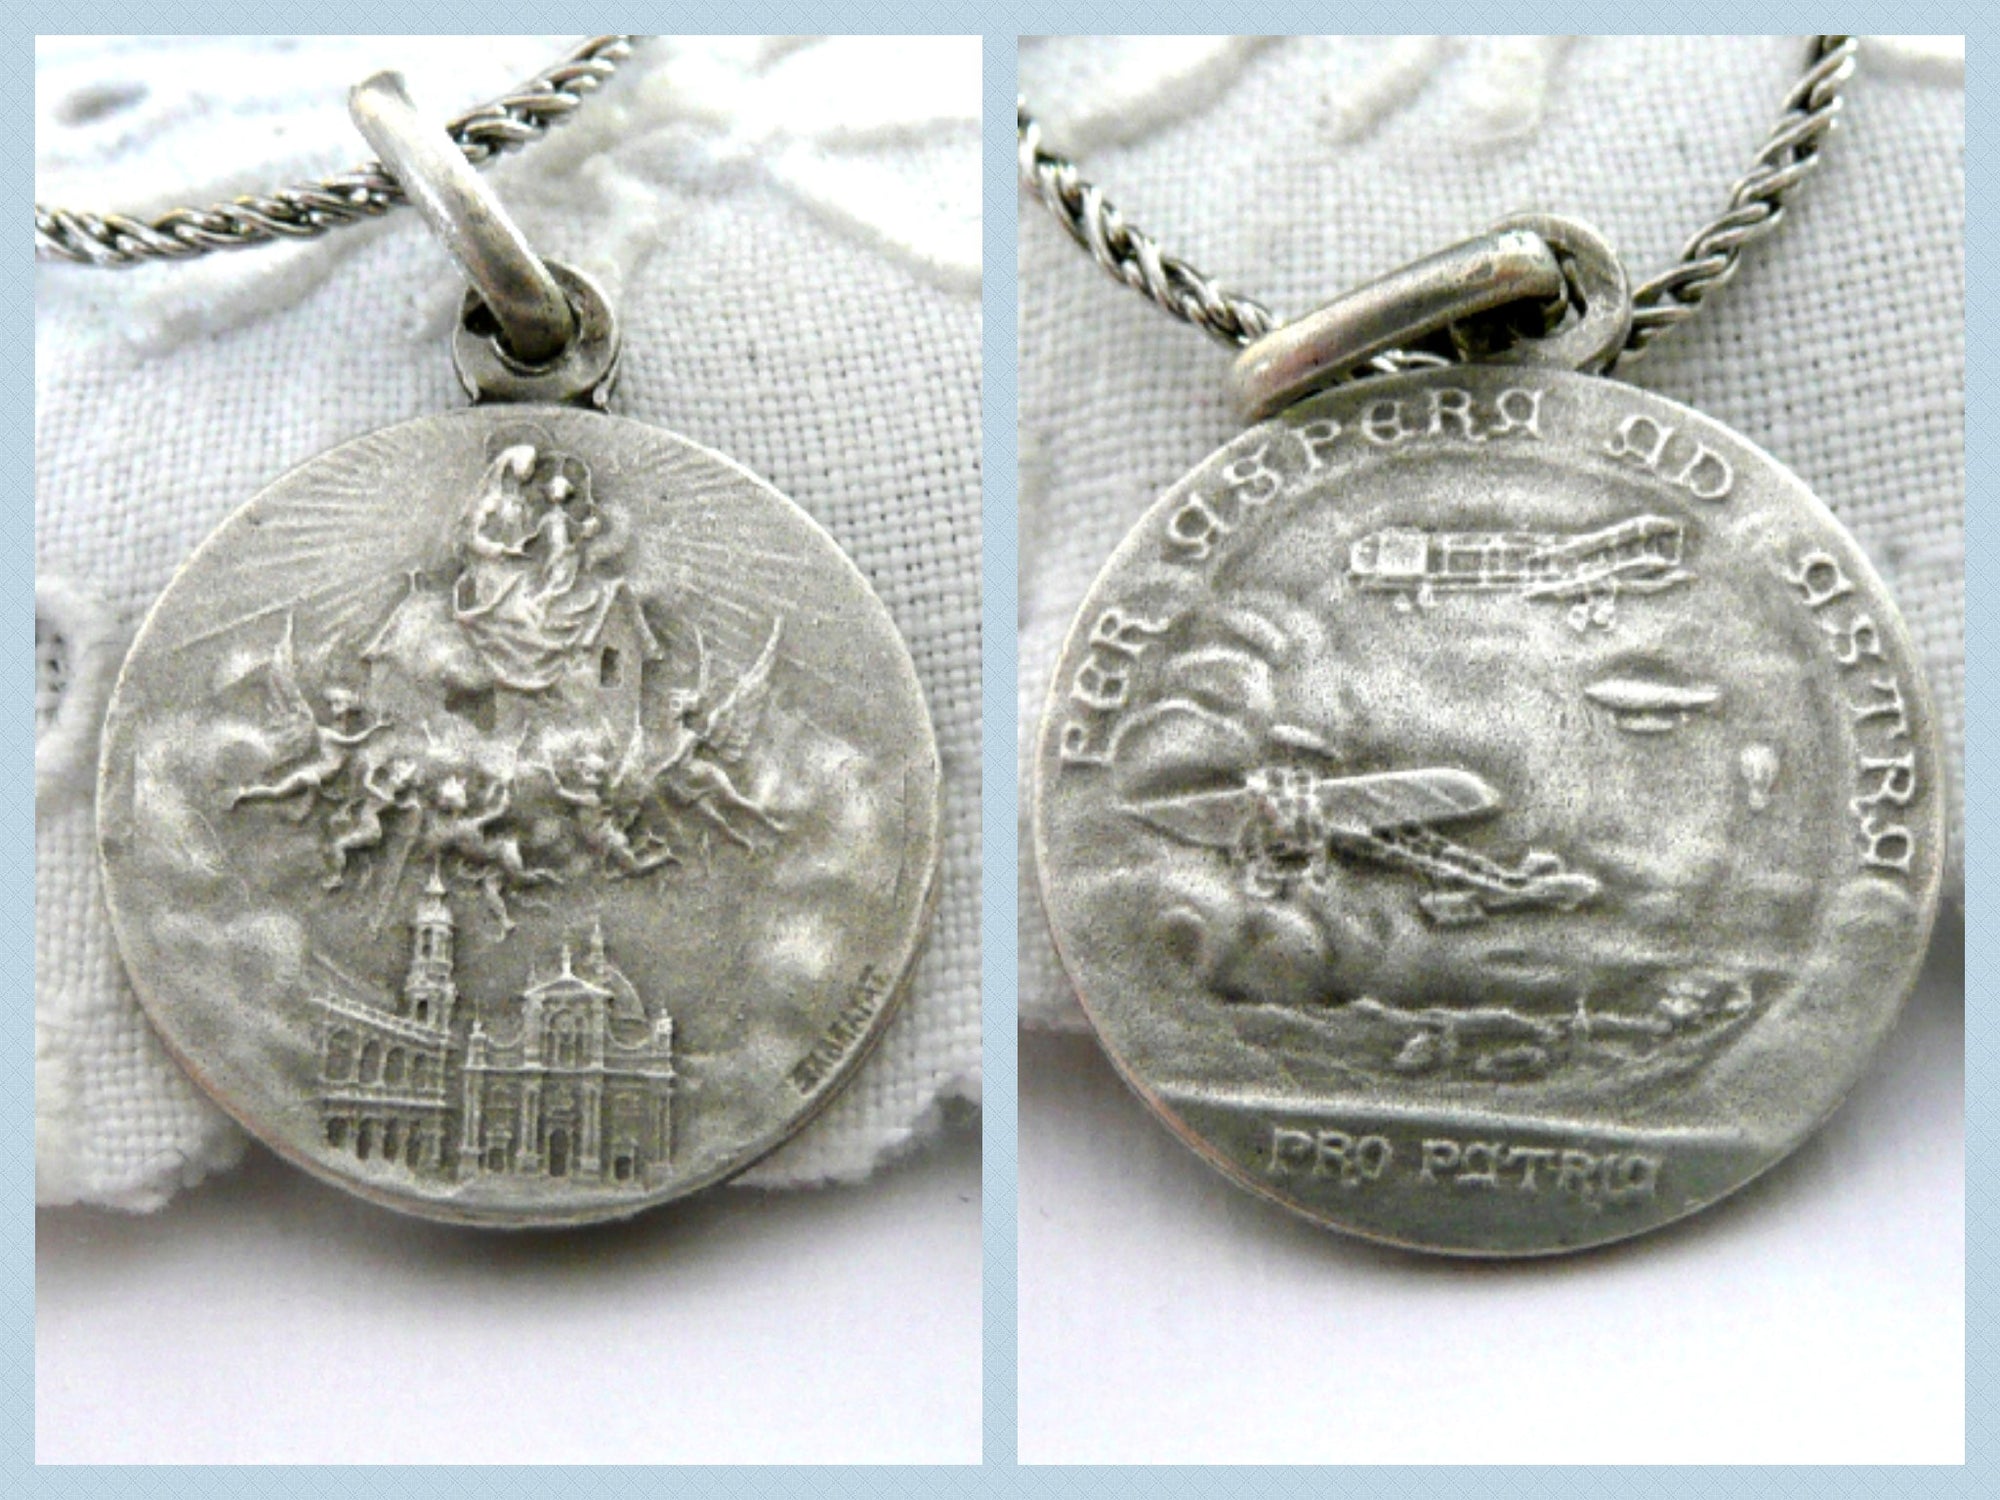 Petite Our Lady of Loreto Aviation Necklace - Vintage French Silver Medal